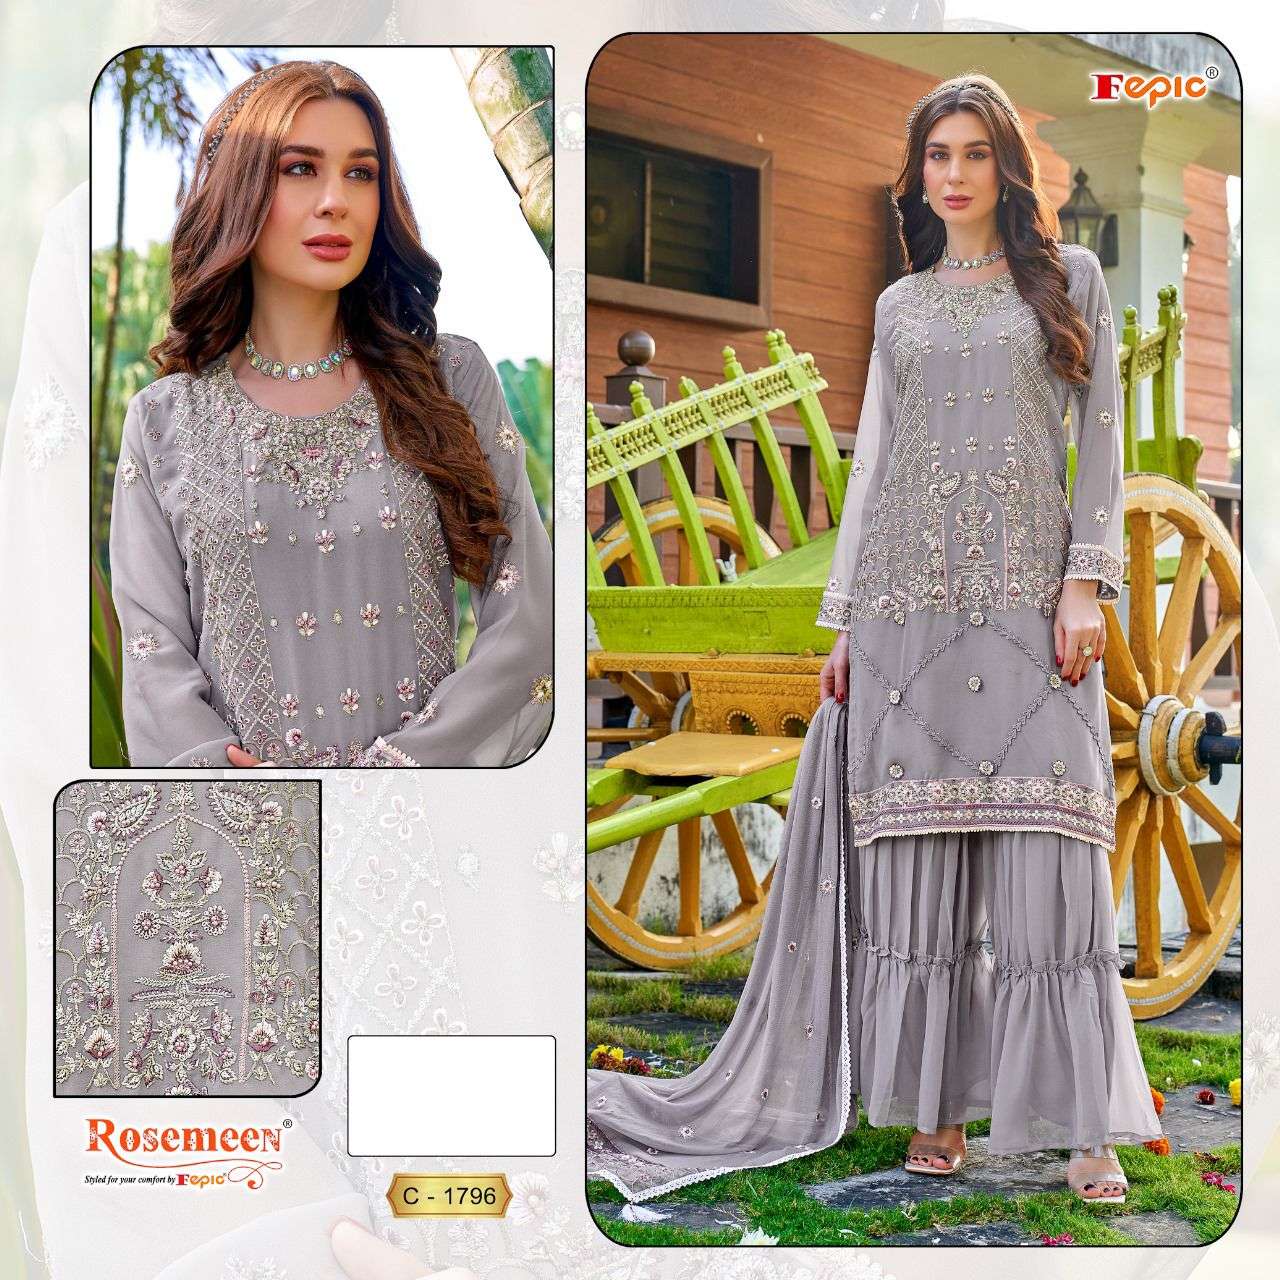 ROSEMEEN C-1796 COLOURS BY FEPIC DESIGNER GEORGETTE EMBROIDERY DRESSES